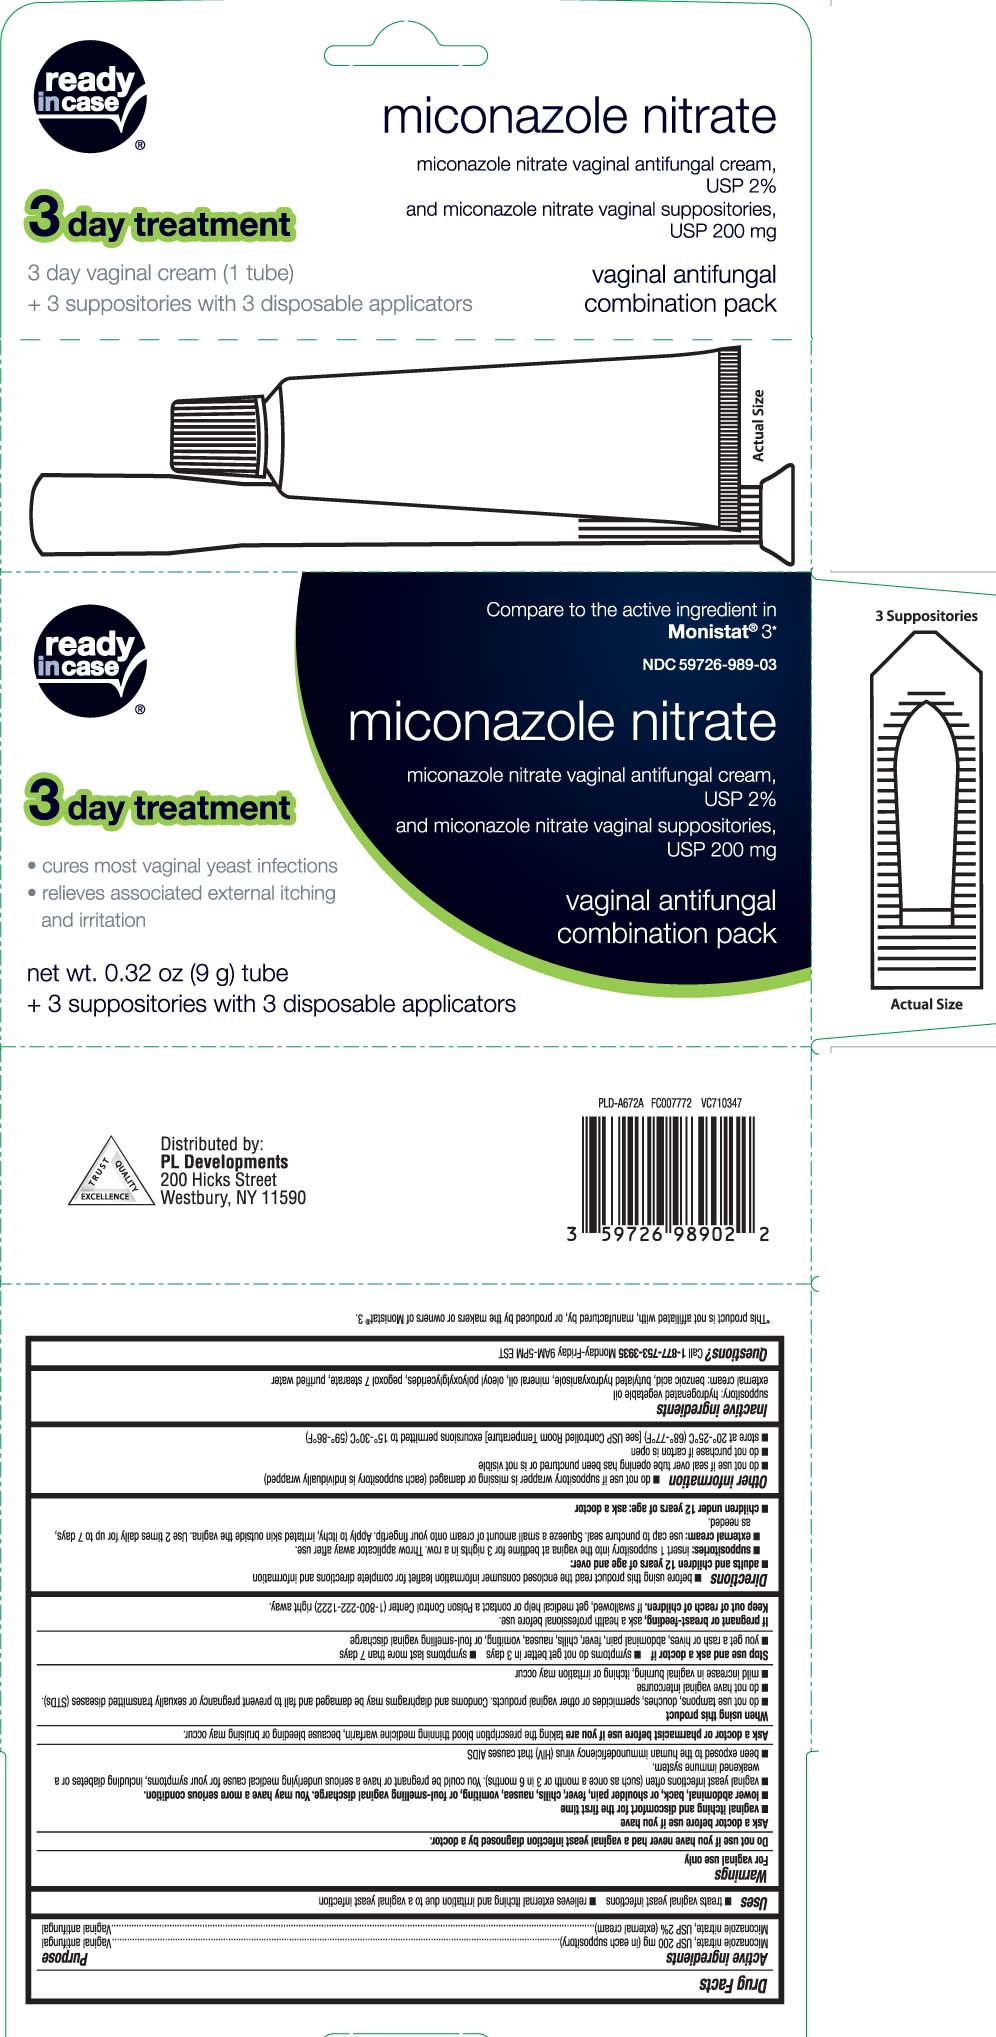 Miconazole nitrate, USP 200 mg (in each suppository Miconazole nitrate, USP 2% (external cream)